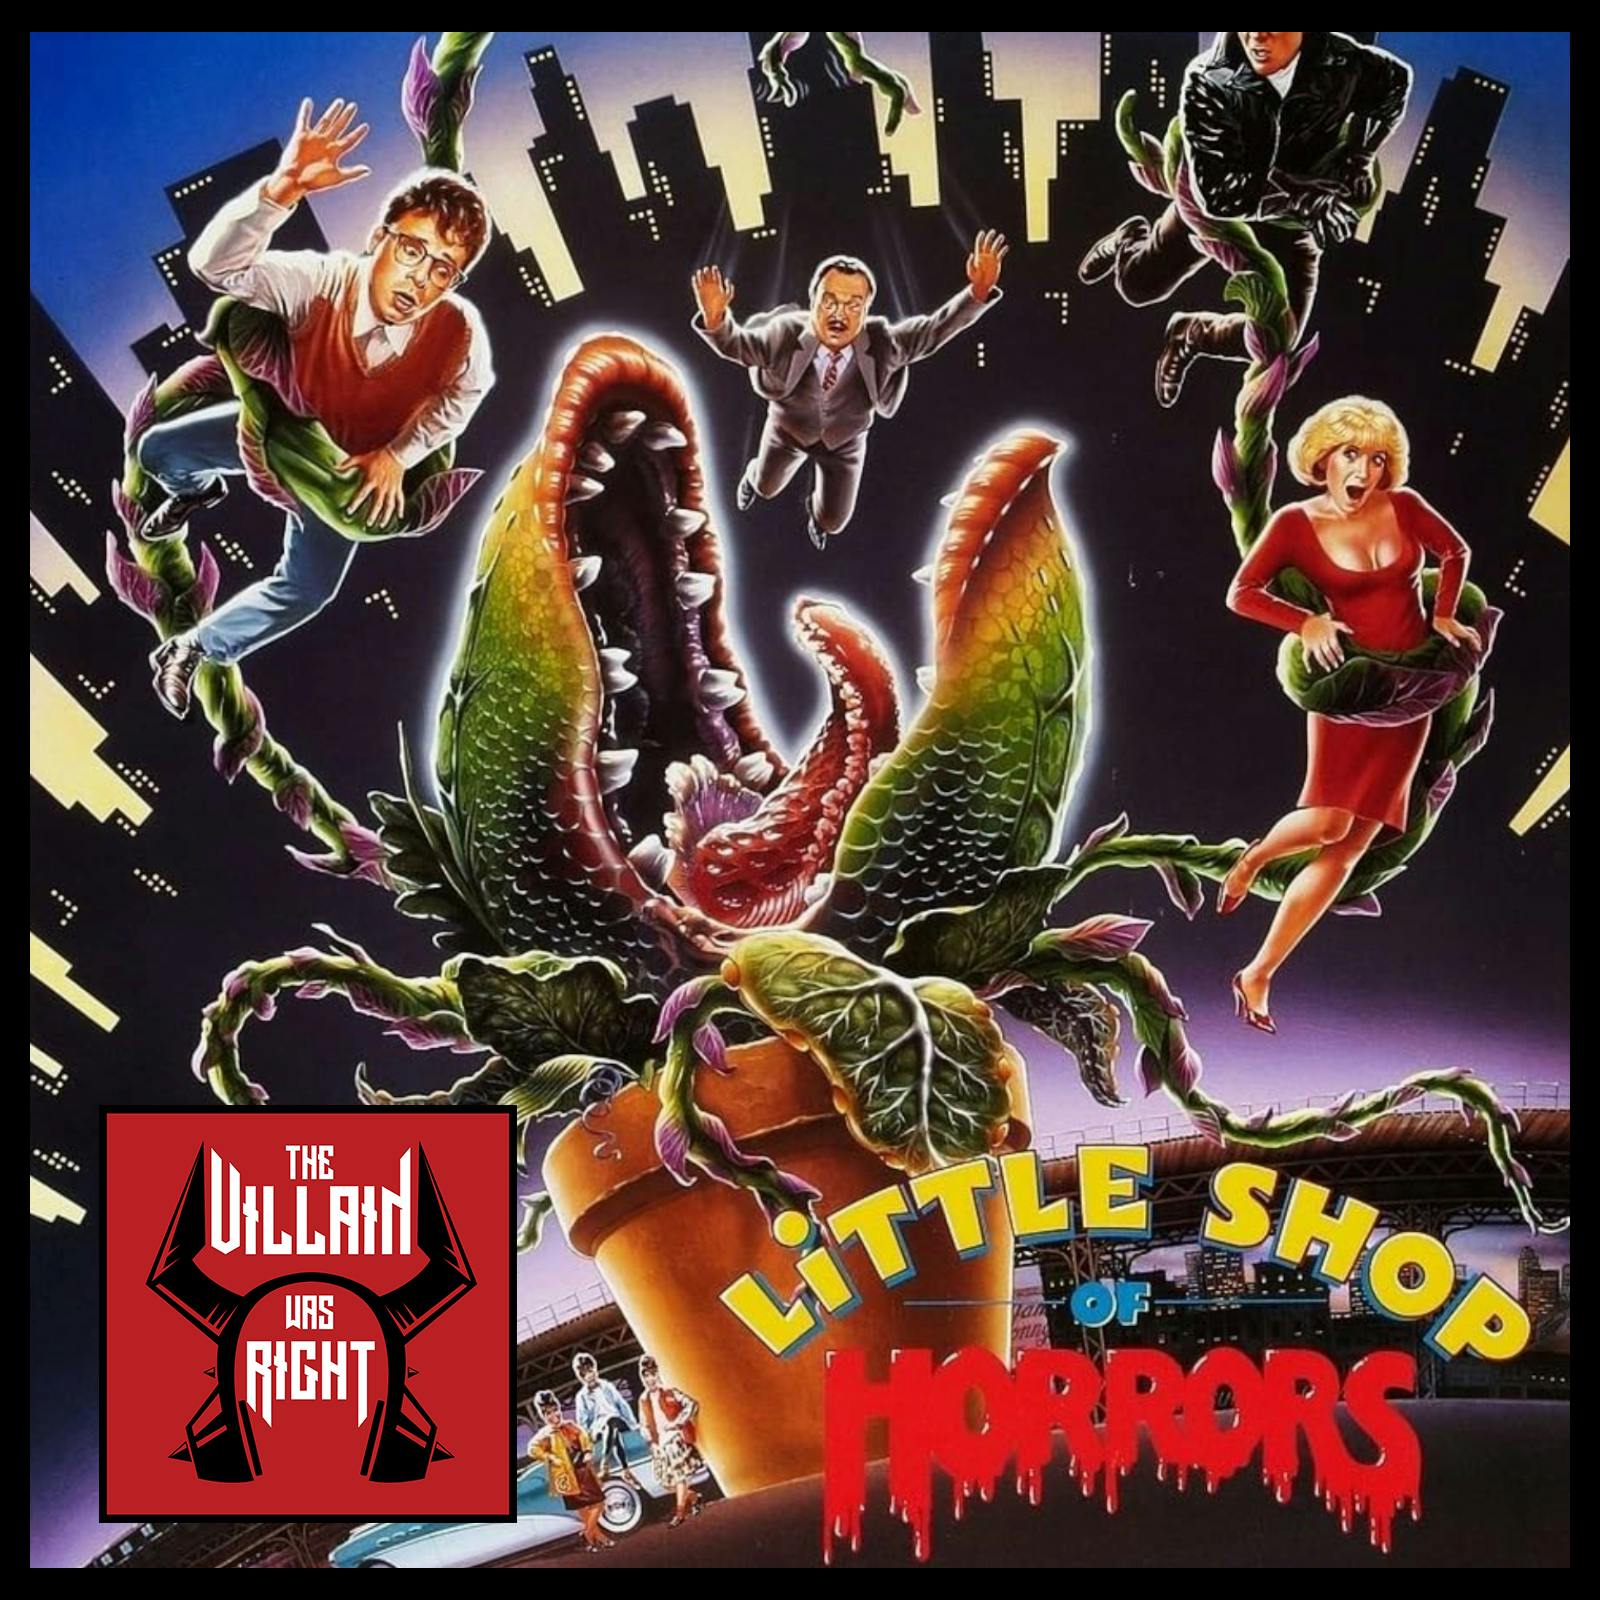 292: Little Shop of Horrors (with Luba Magnus)